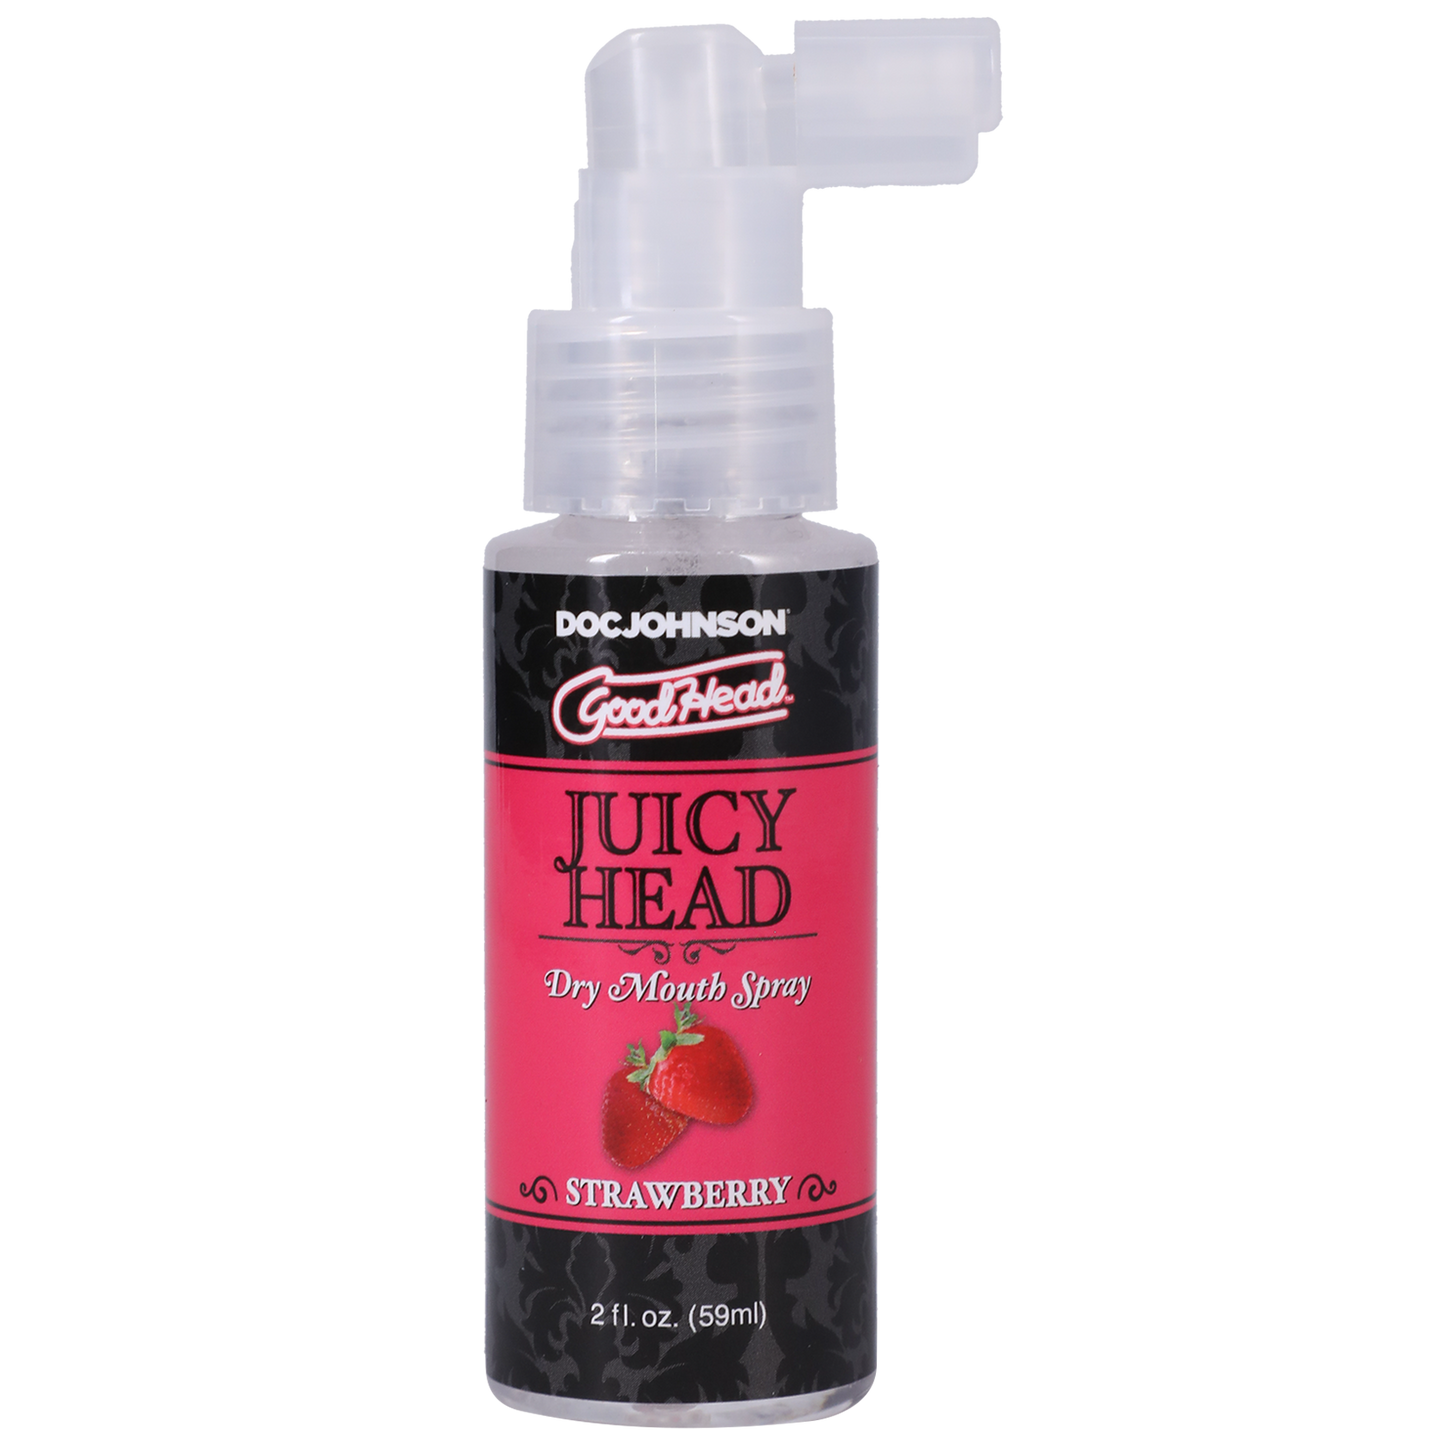 Photo of the bottle of GoodHead Juicy Head from Doc Johson (strawberry) shows its easy to use pump spray nozzle.